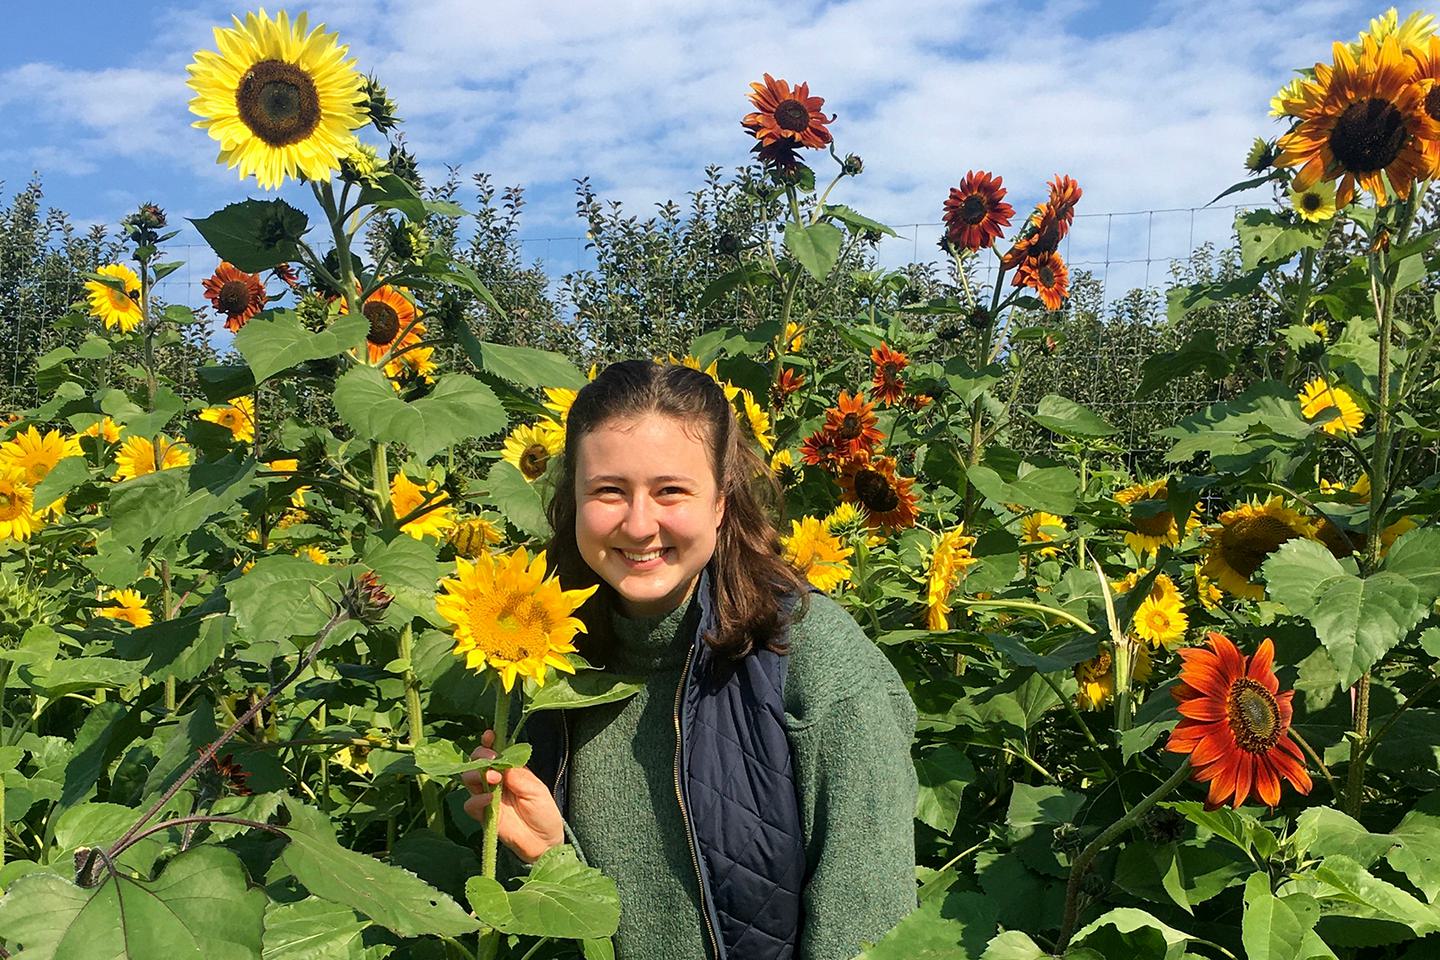 Dominique Mickiewicz stands in a garden of sunflowers and smiles at the camera.